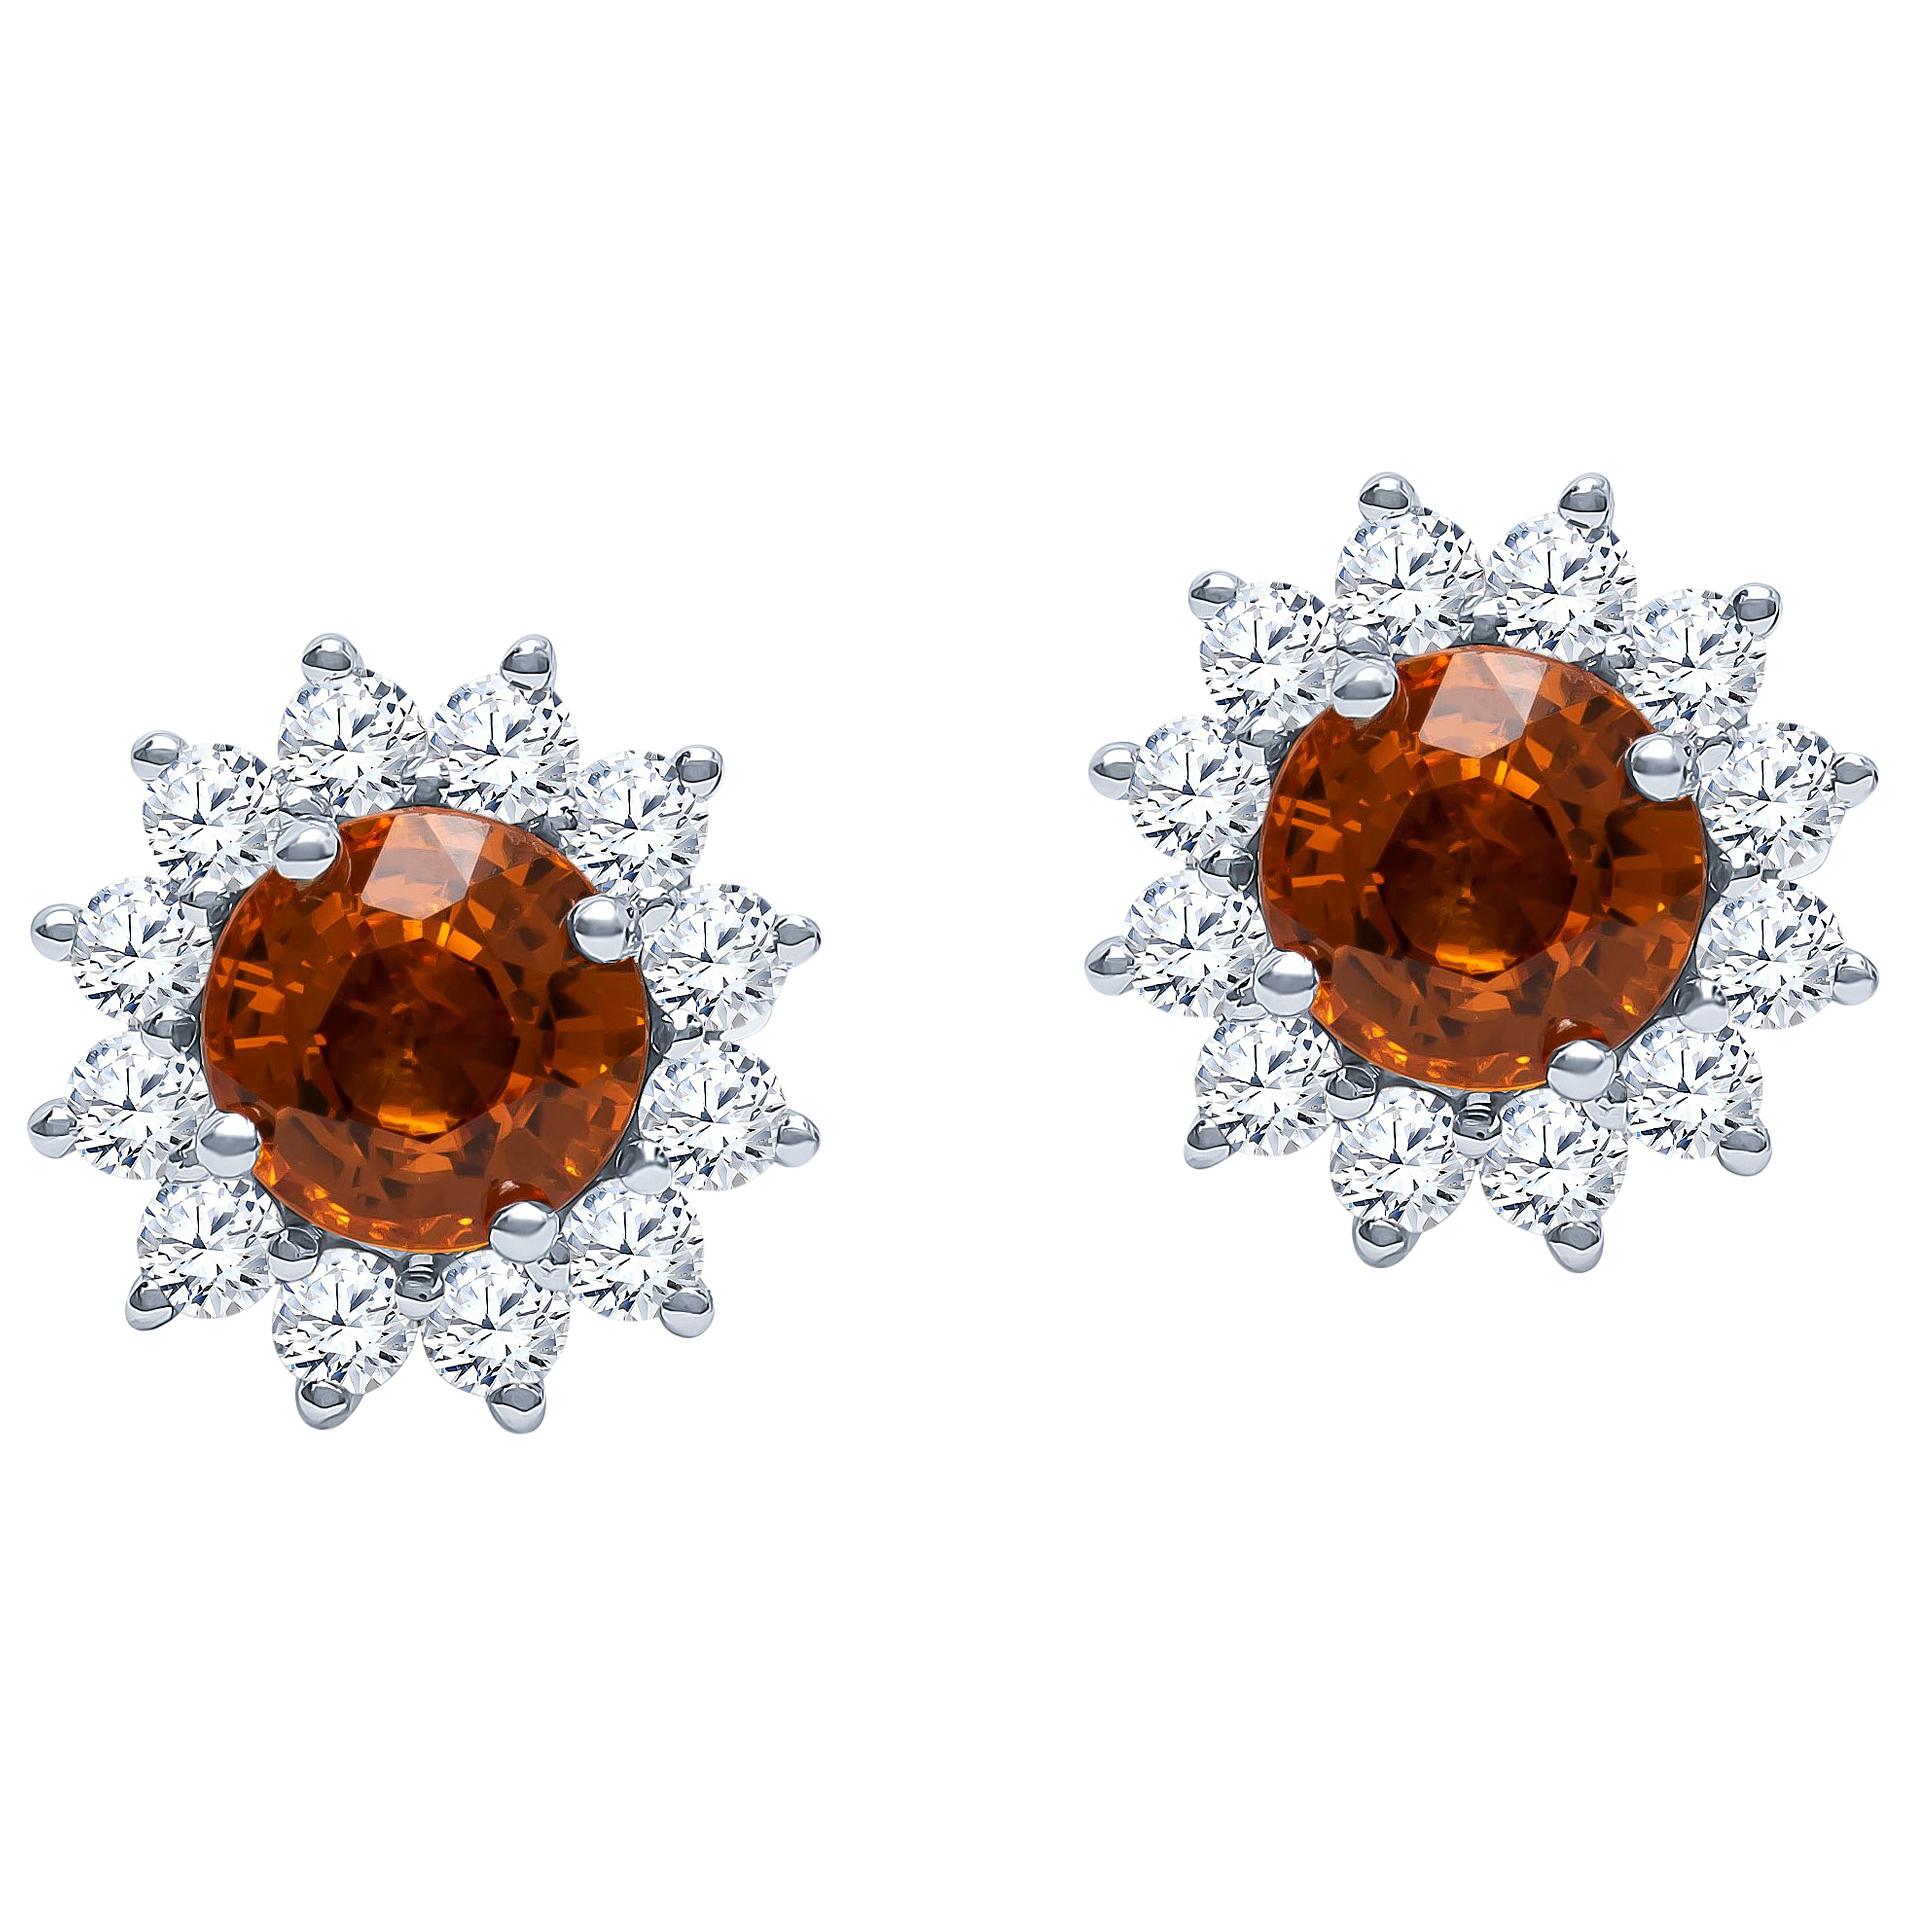 2.22ct Natural Bright Orange Sapphire Stud Earrings with 0.73ct in fine Diamonds